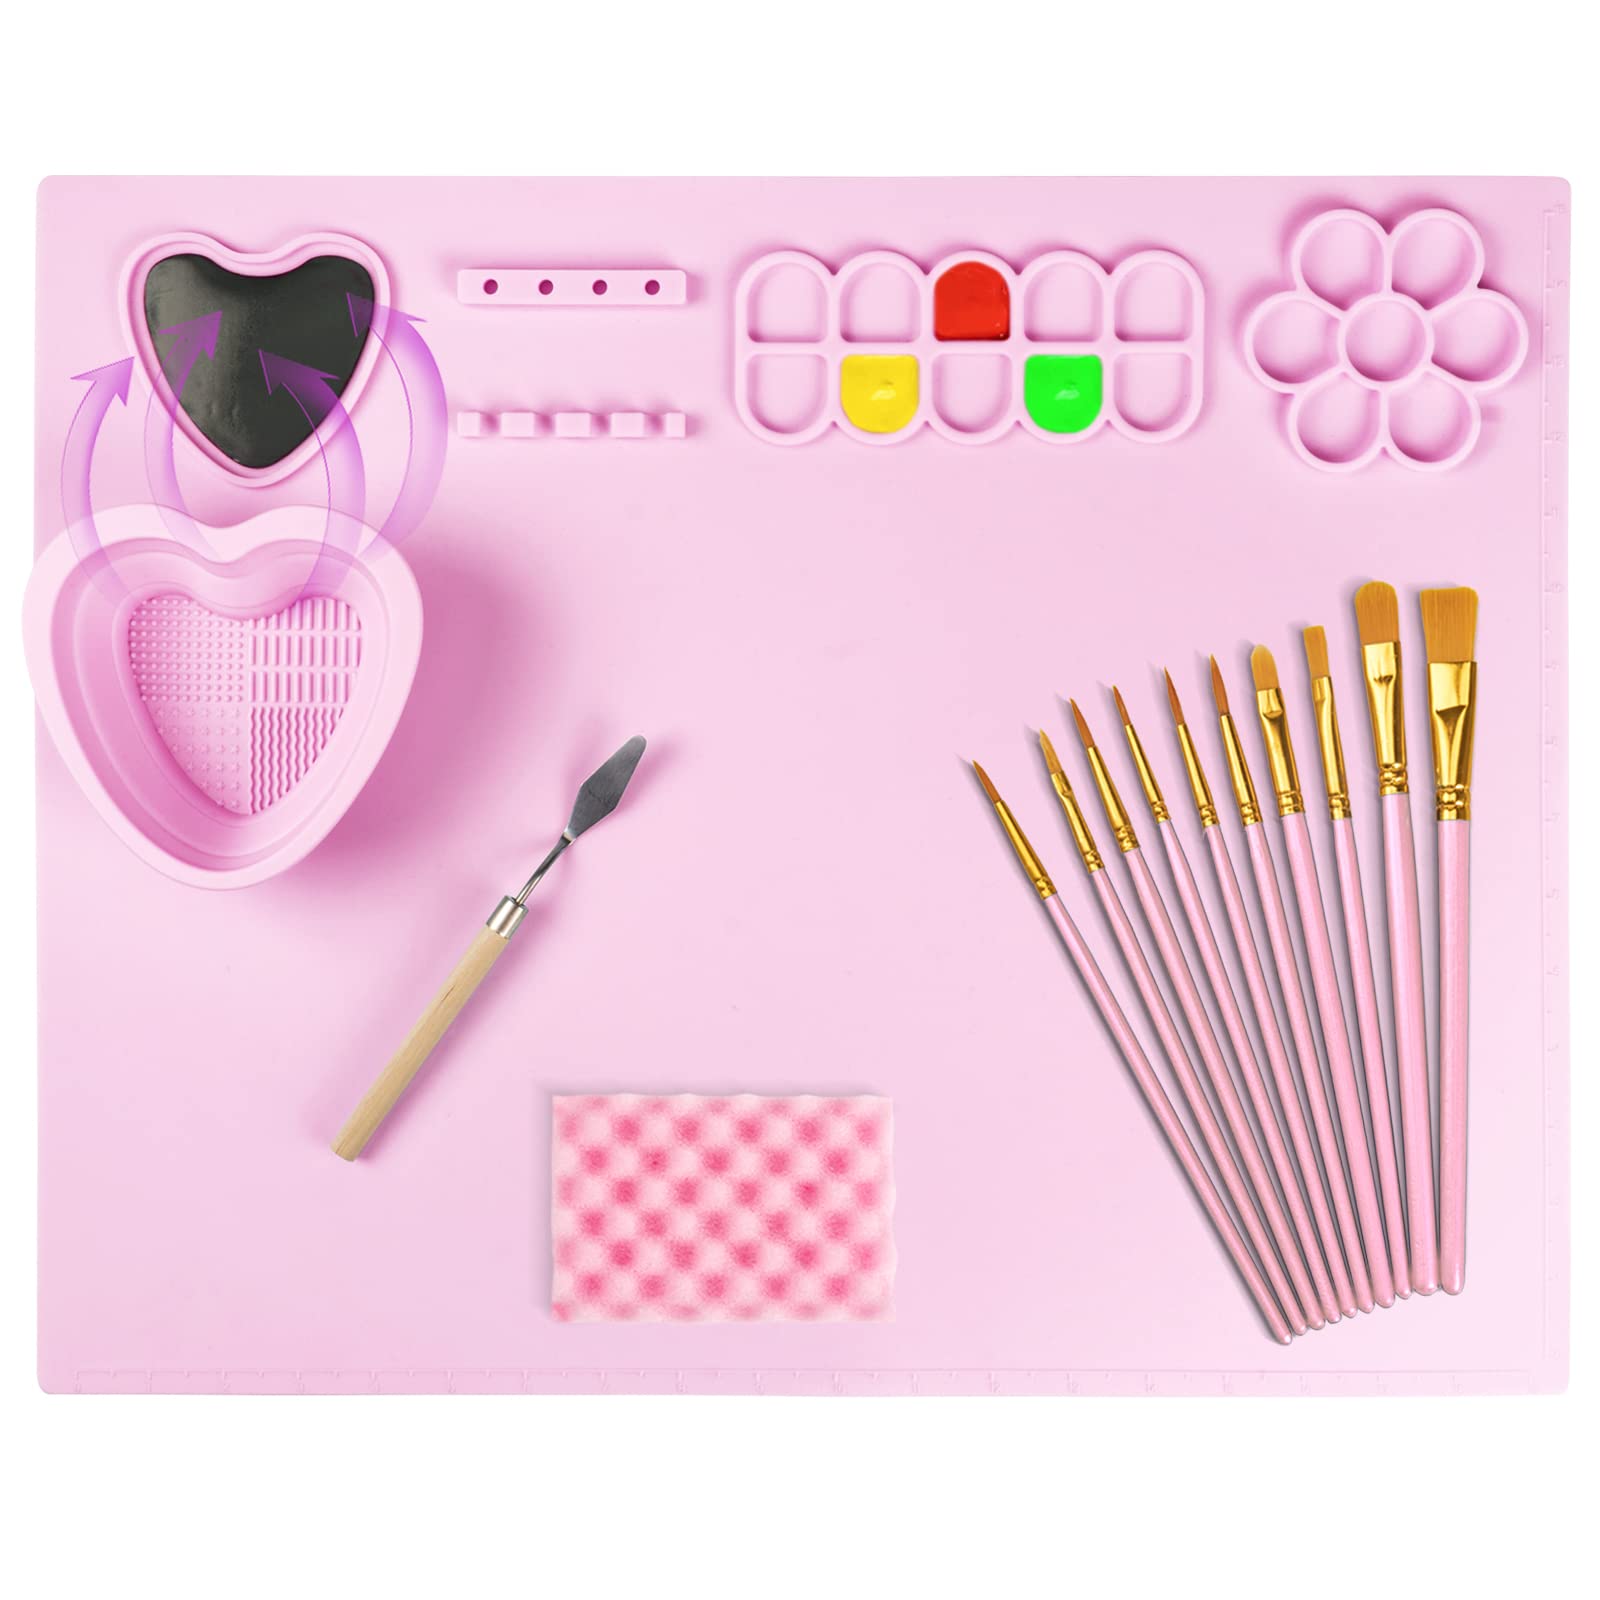 Paint Palette,Thick Silicone Craft Mat with Magnetic Pop-Up Water